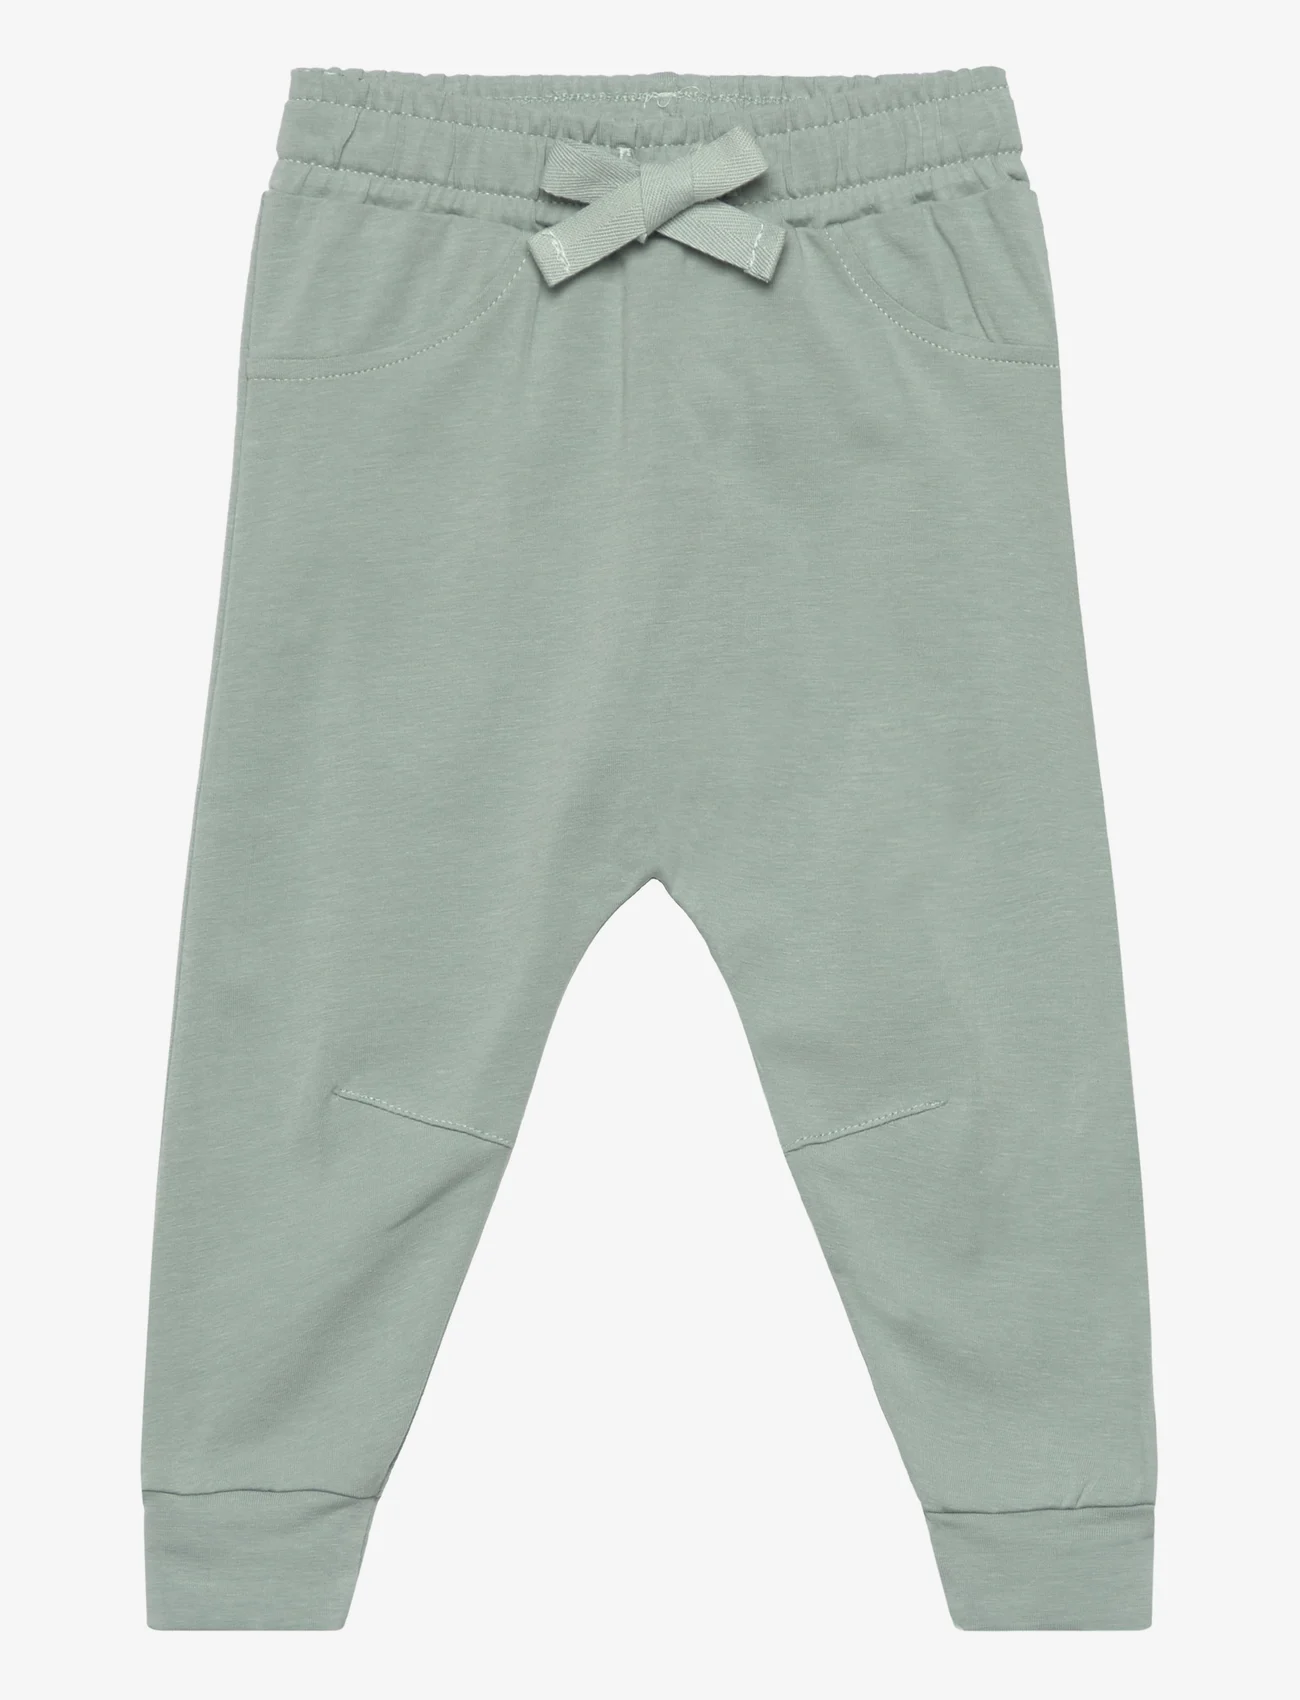 Müsli by Green Cotton - Cozy me dart pants baby - lowest prices - spa green - 0